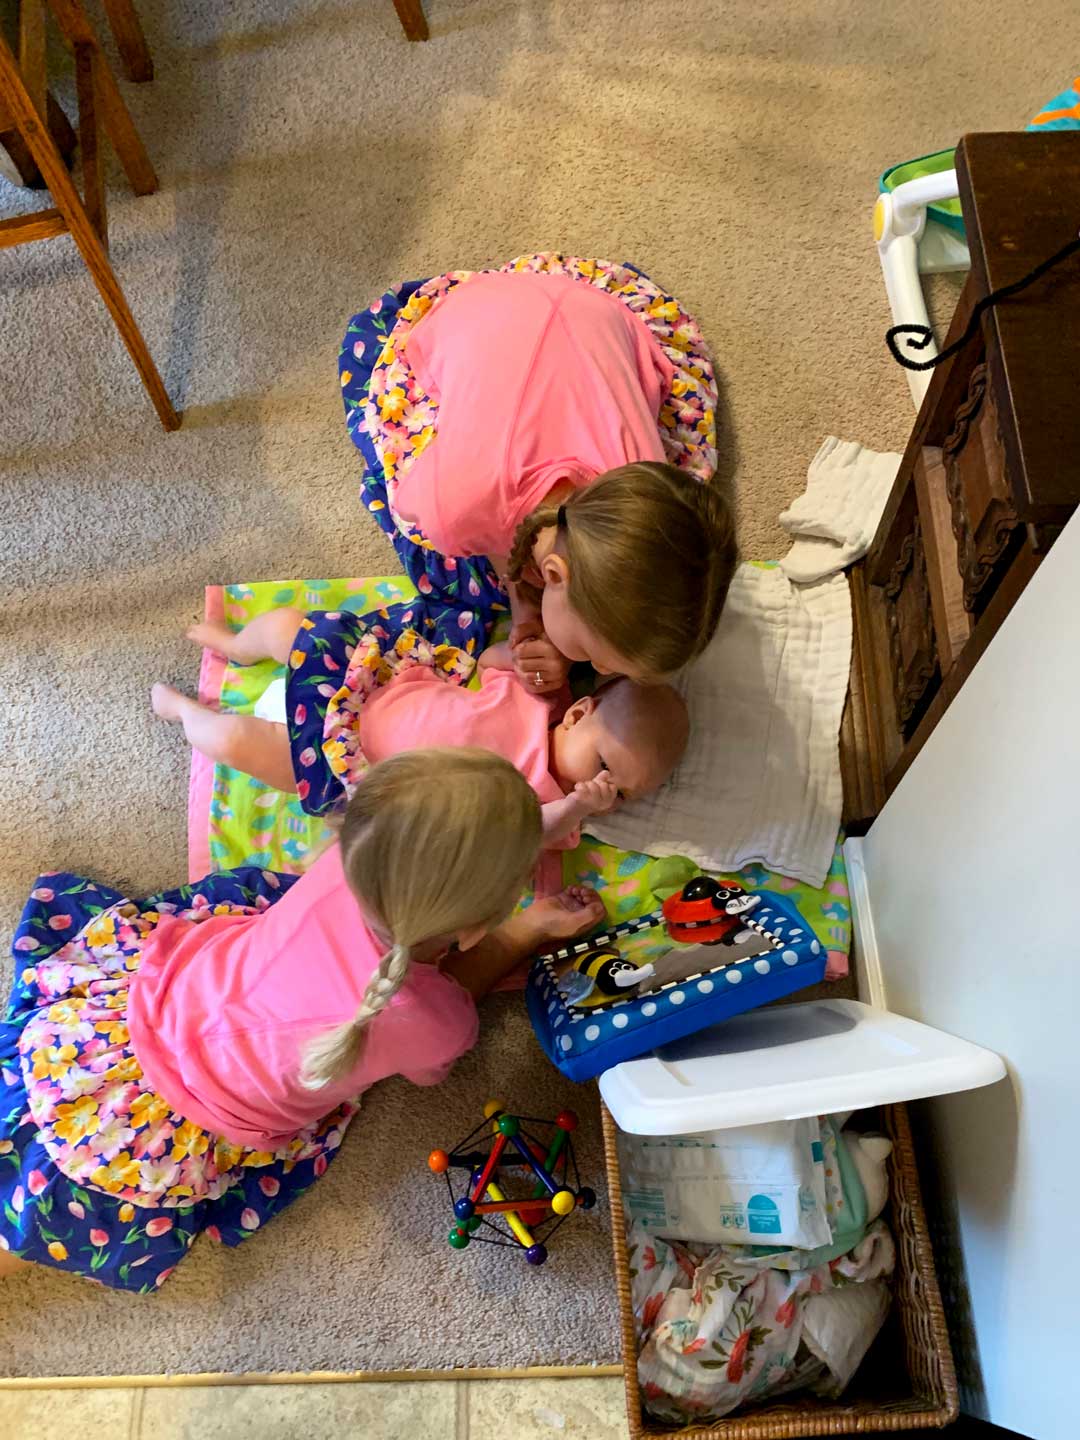 Two girls gathered around a baby, all wearing pink and floral homemade t-shirt dresses.